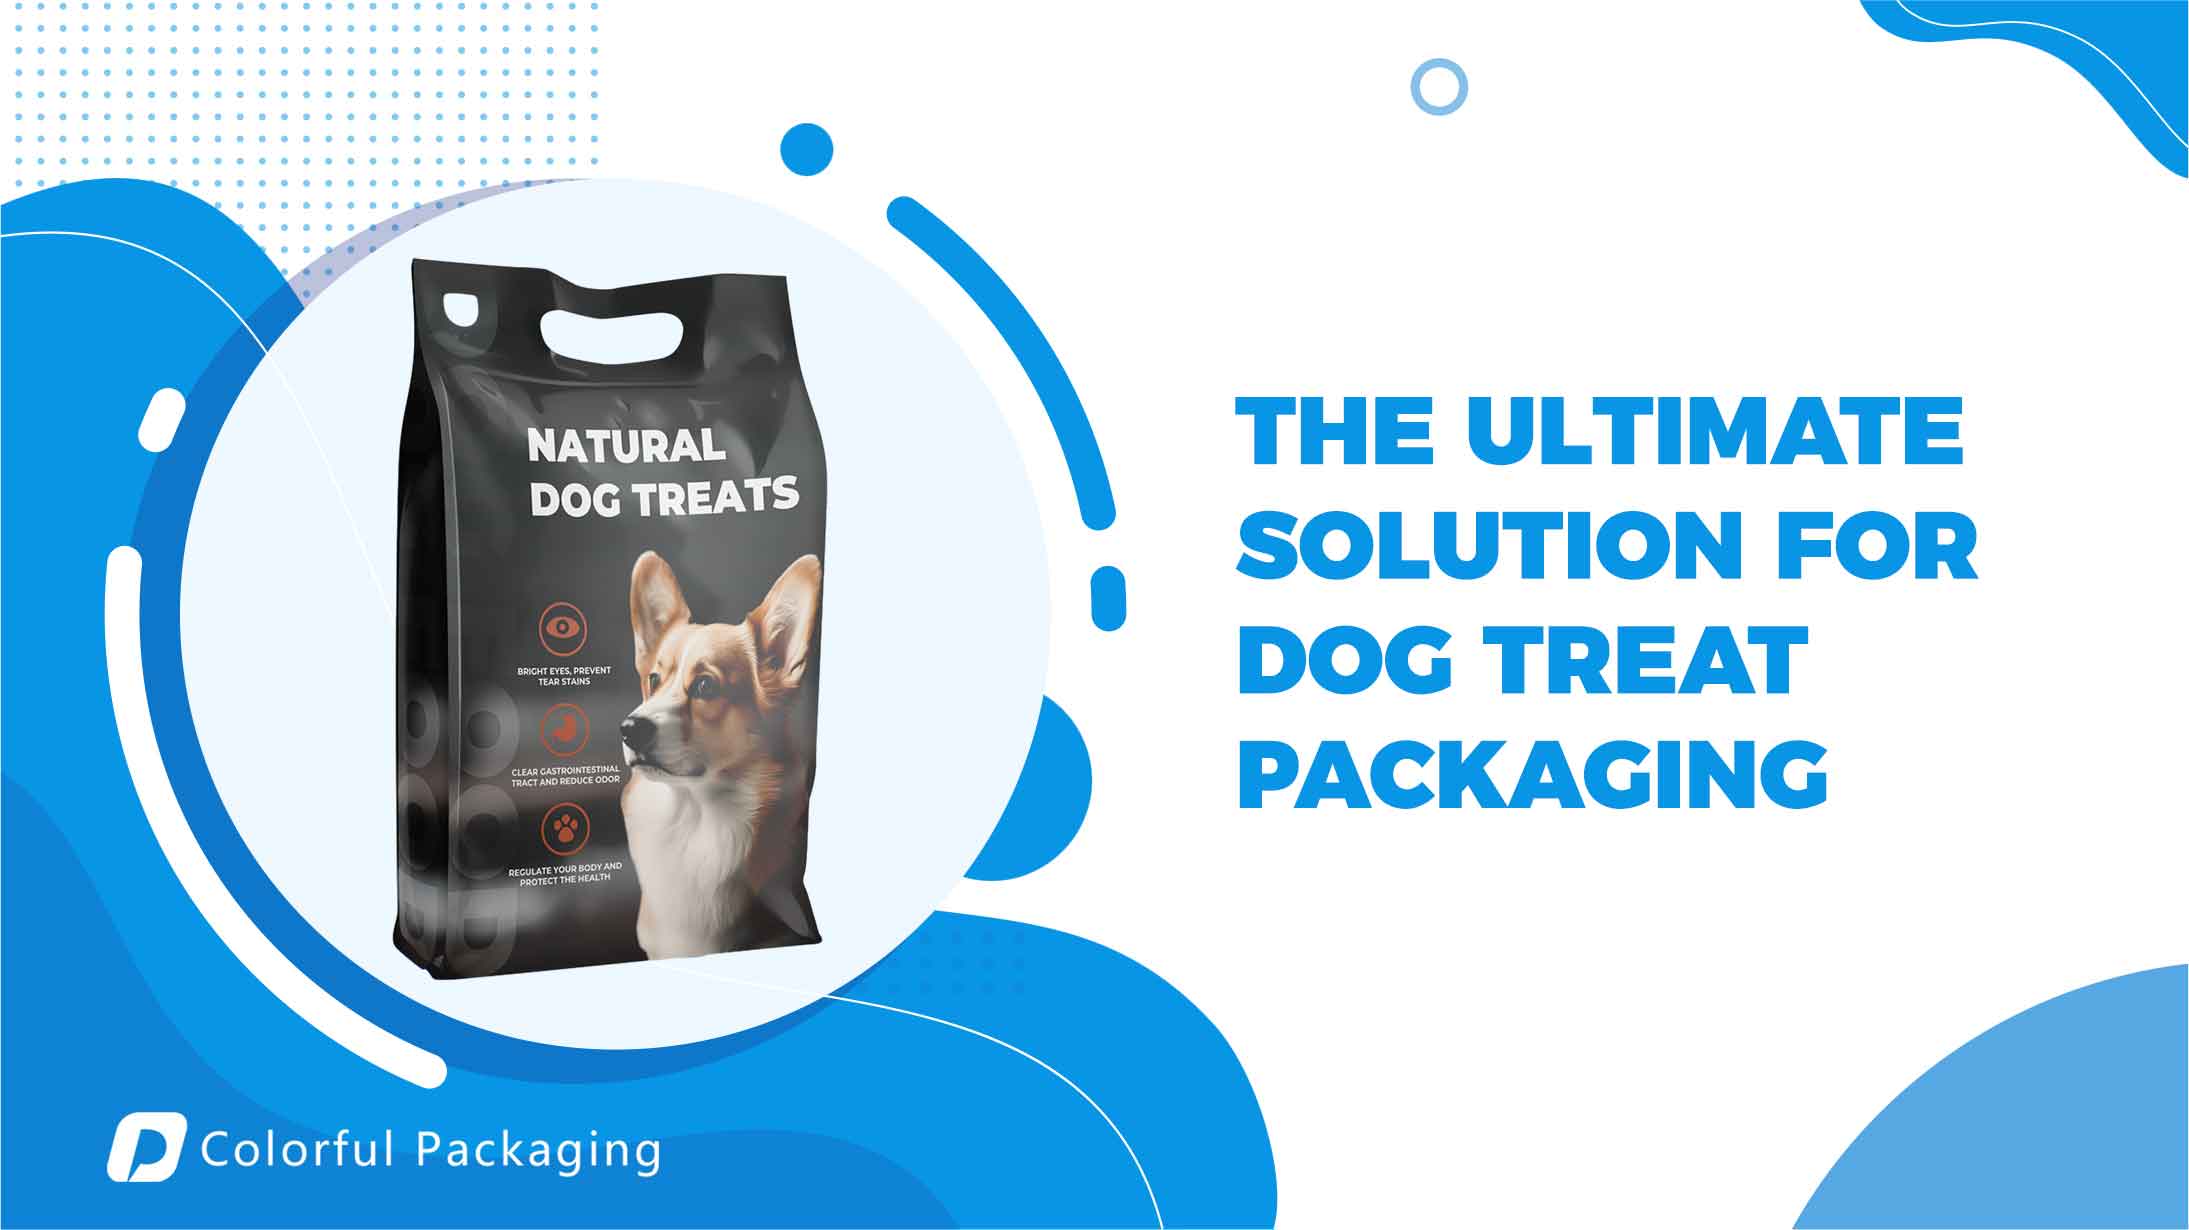 The ultimate solution for dog treat packaging